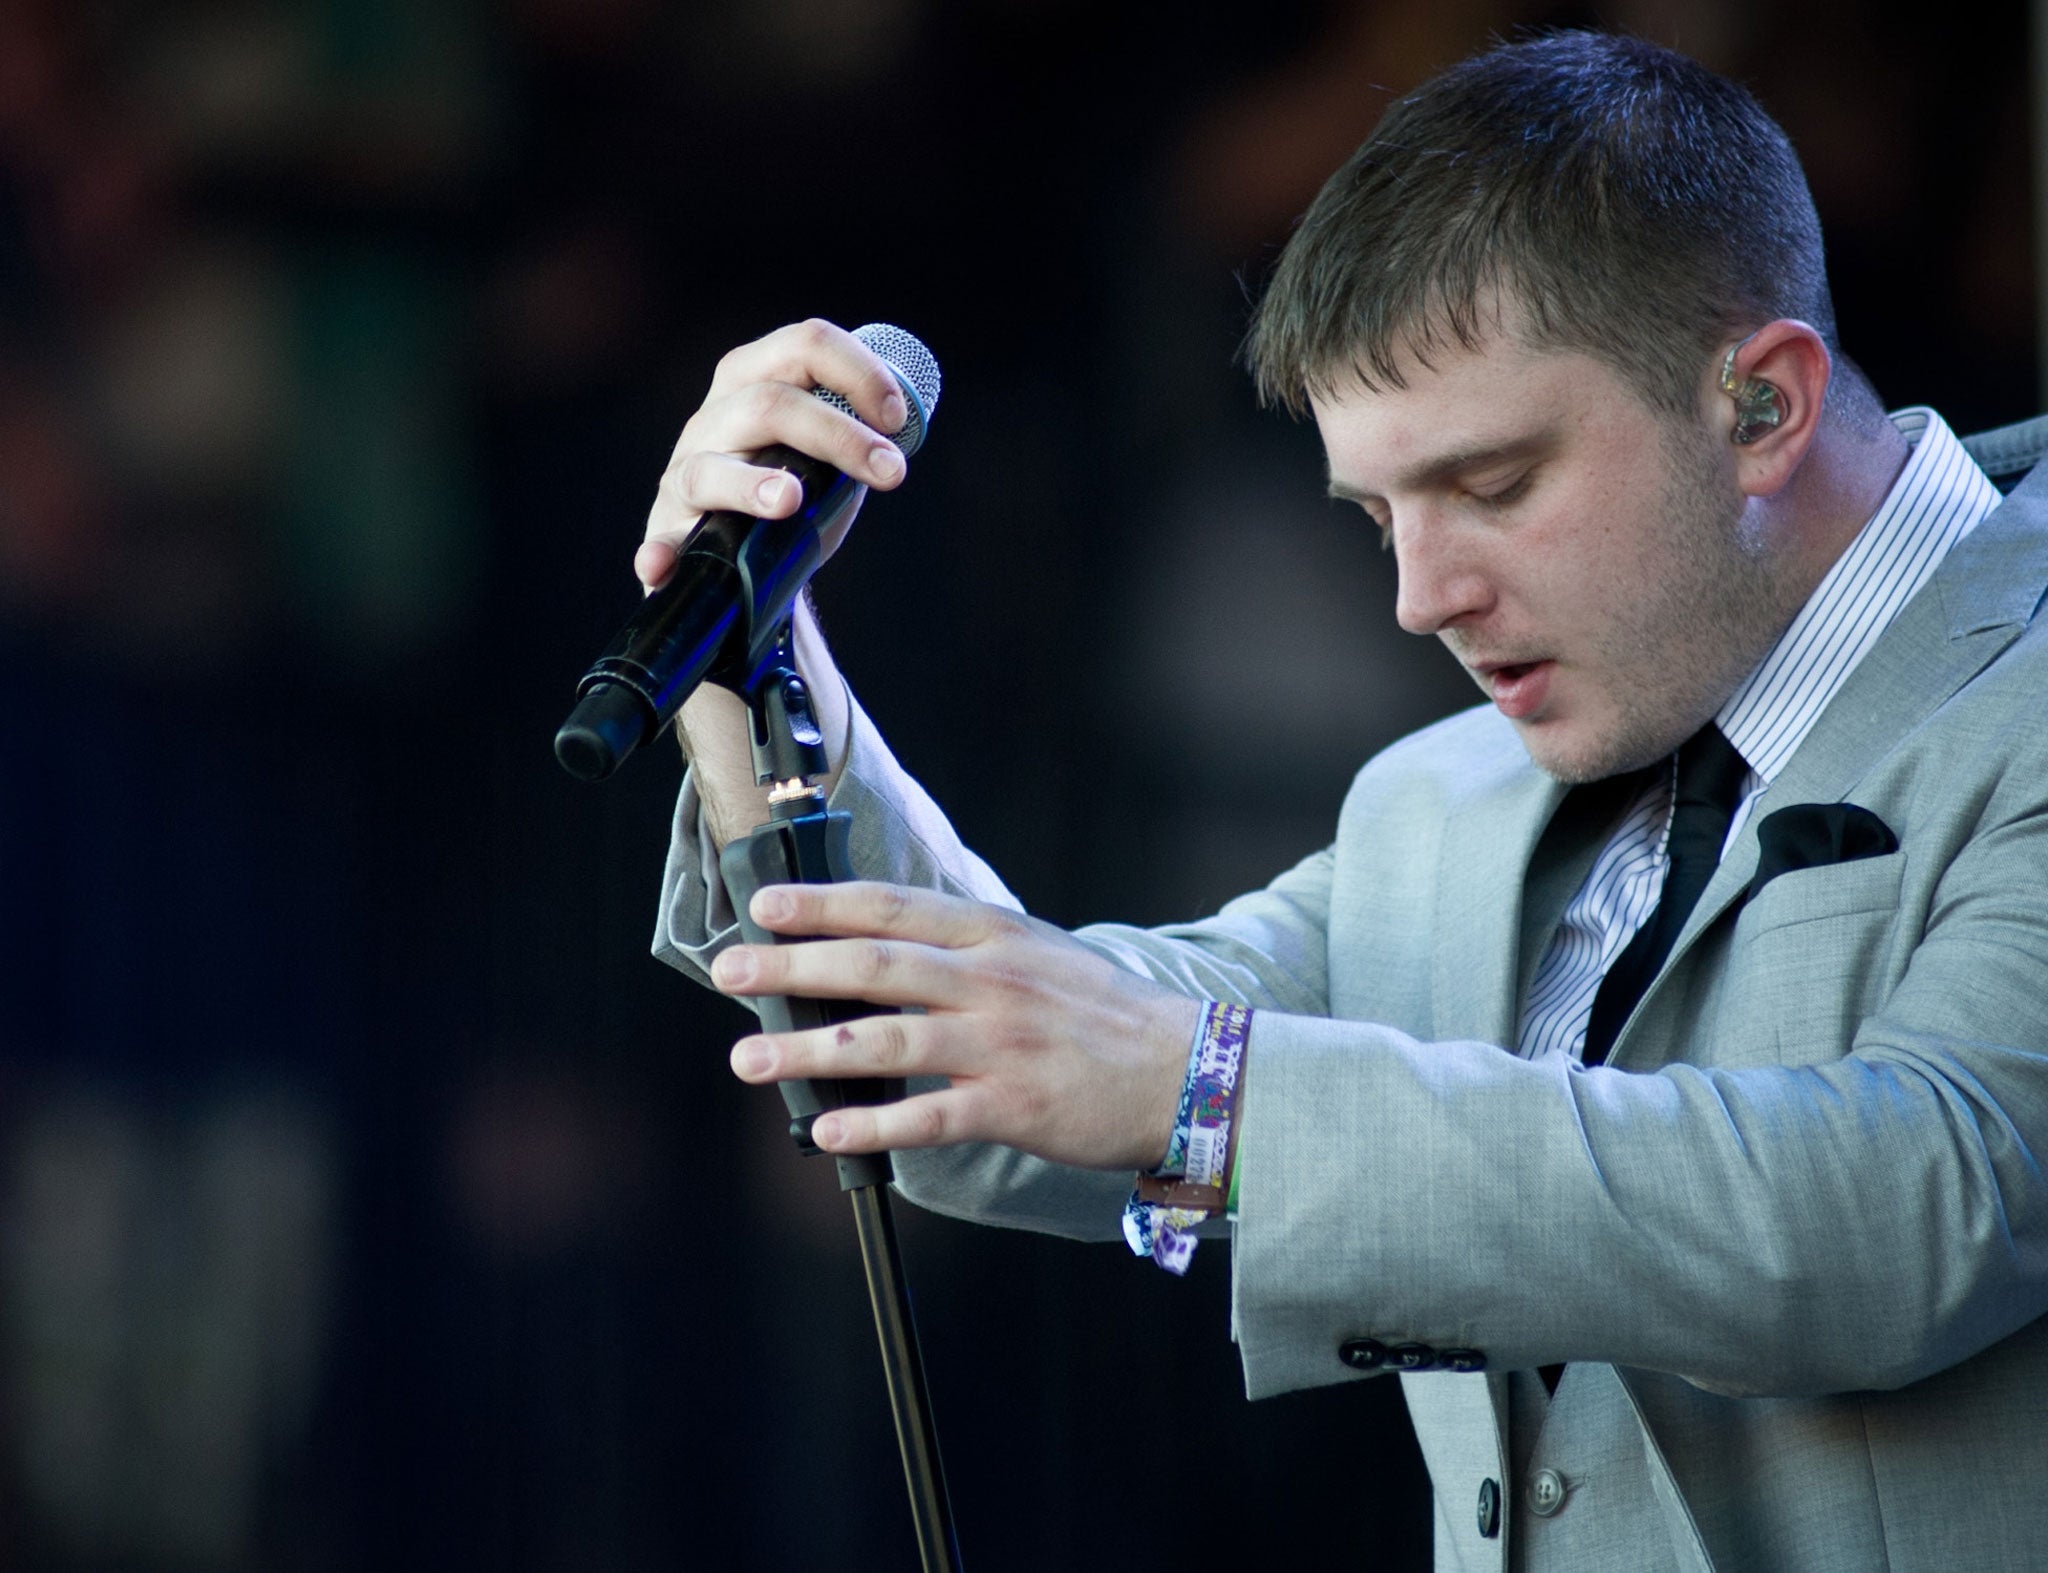 Plan B played a promotional show to mark the arrival of 4G on O2